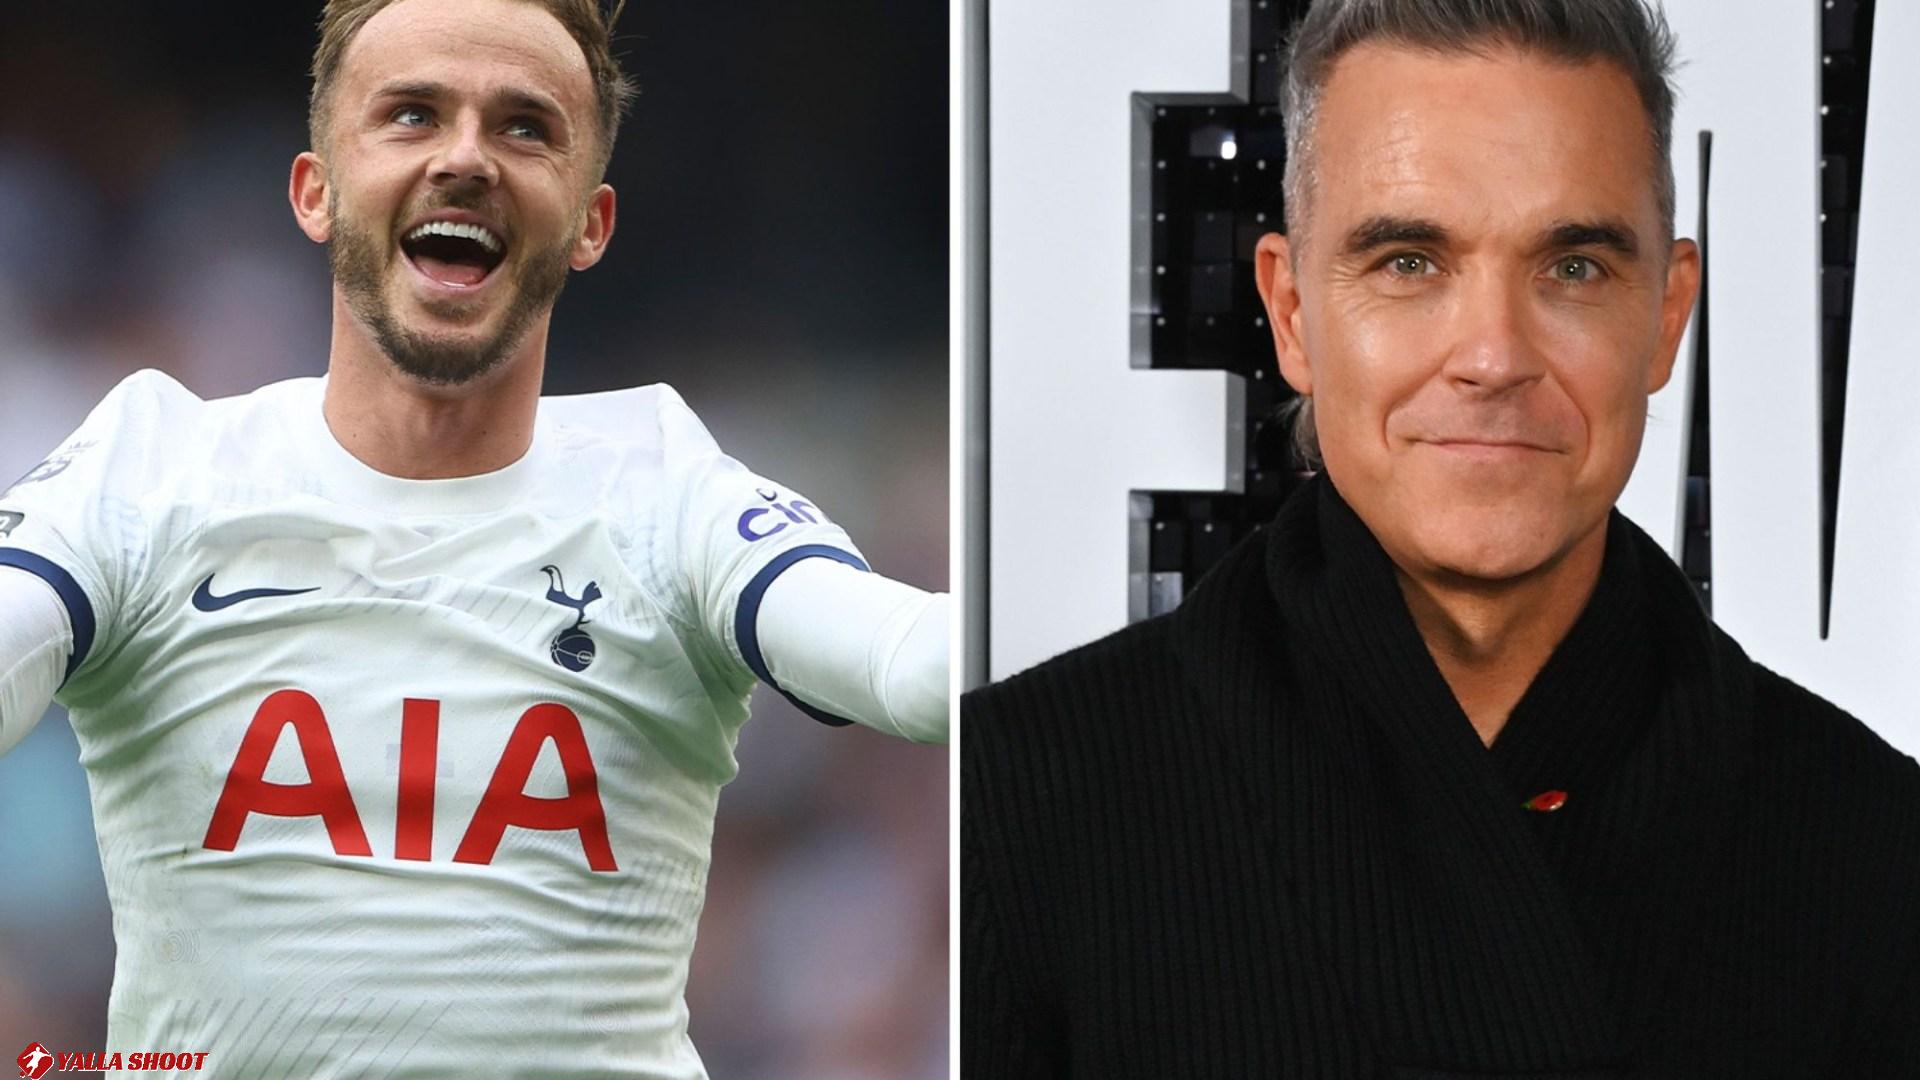 James Maddison reveals he was 'stitched up' by England team-mate and ended up doing duet with Robbie Williams